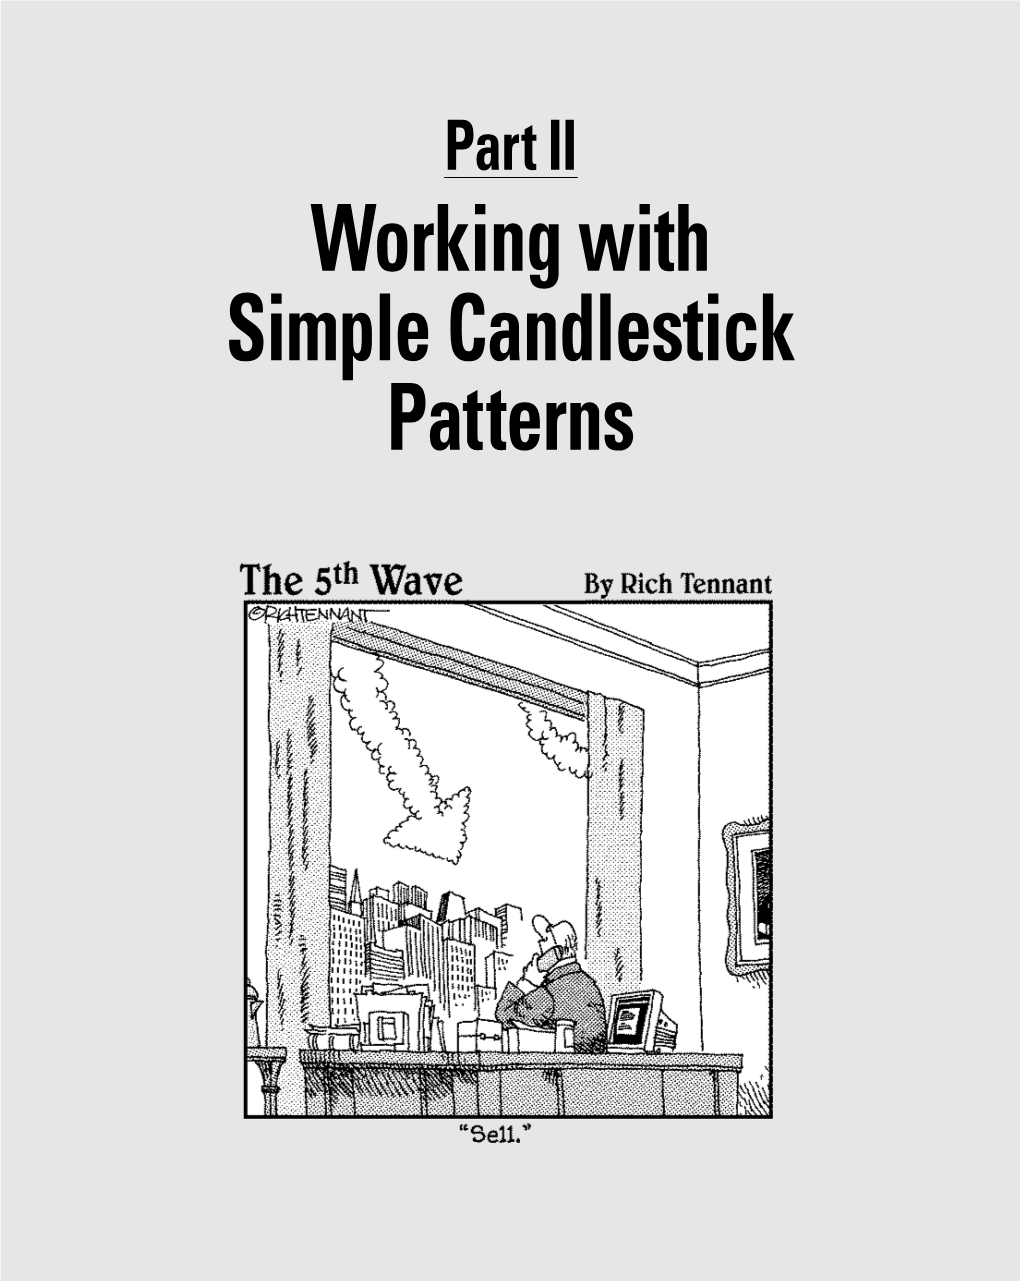 Working with Simple Candlestick Patterns 09 178089 Pp02.Qxp 2/27/08 9:48 PM Page 72